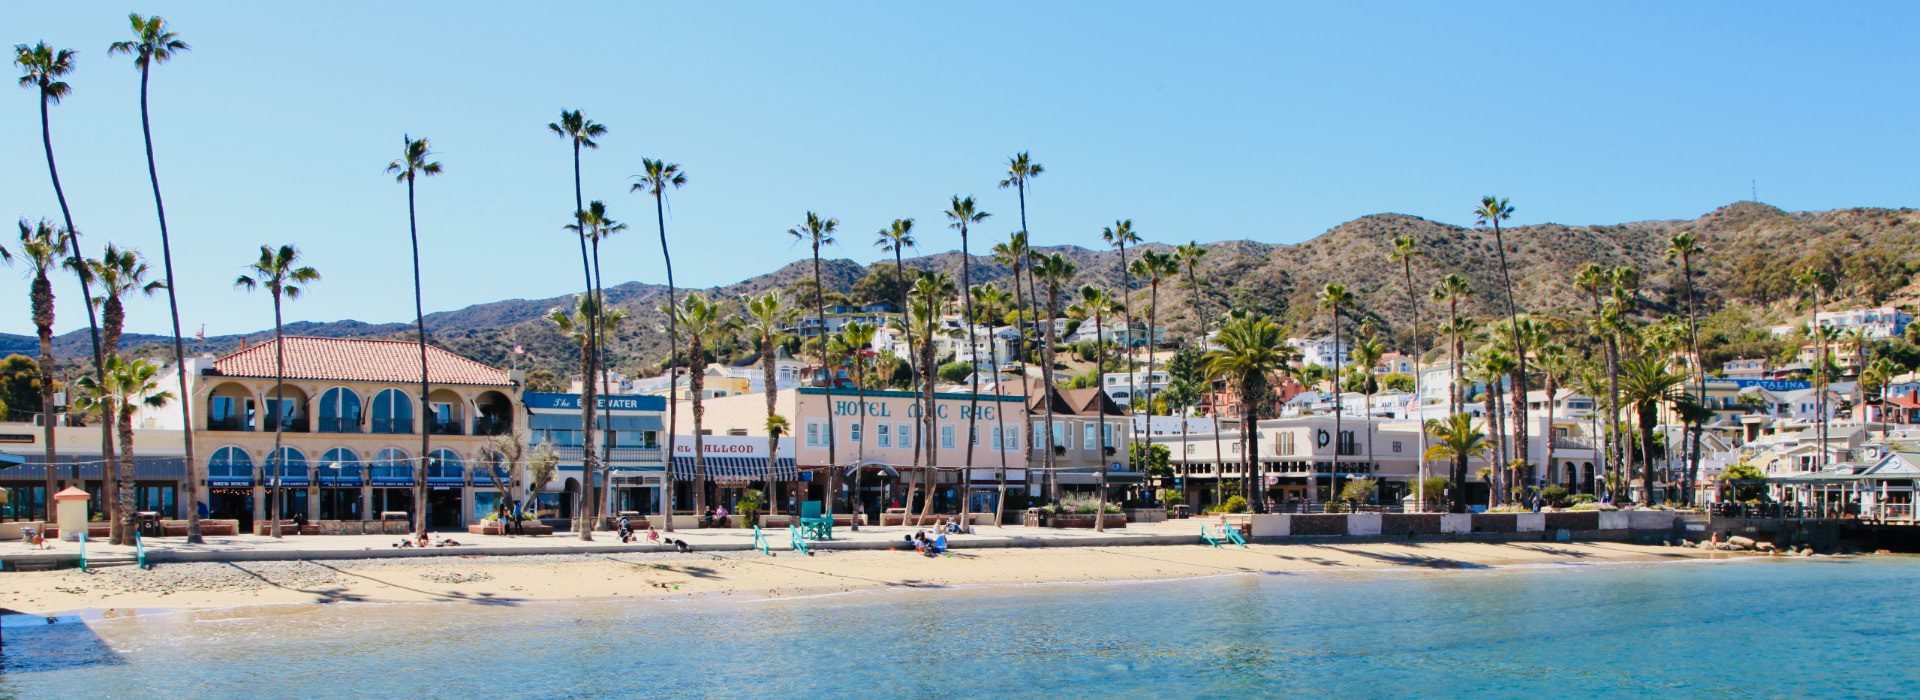 Beach front full of retail and lodging businesses surrounded by palm trees and hills in the background